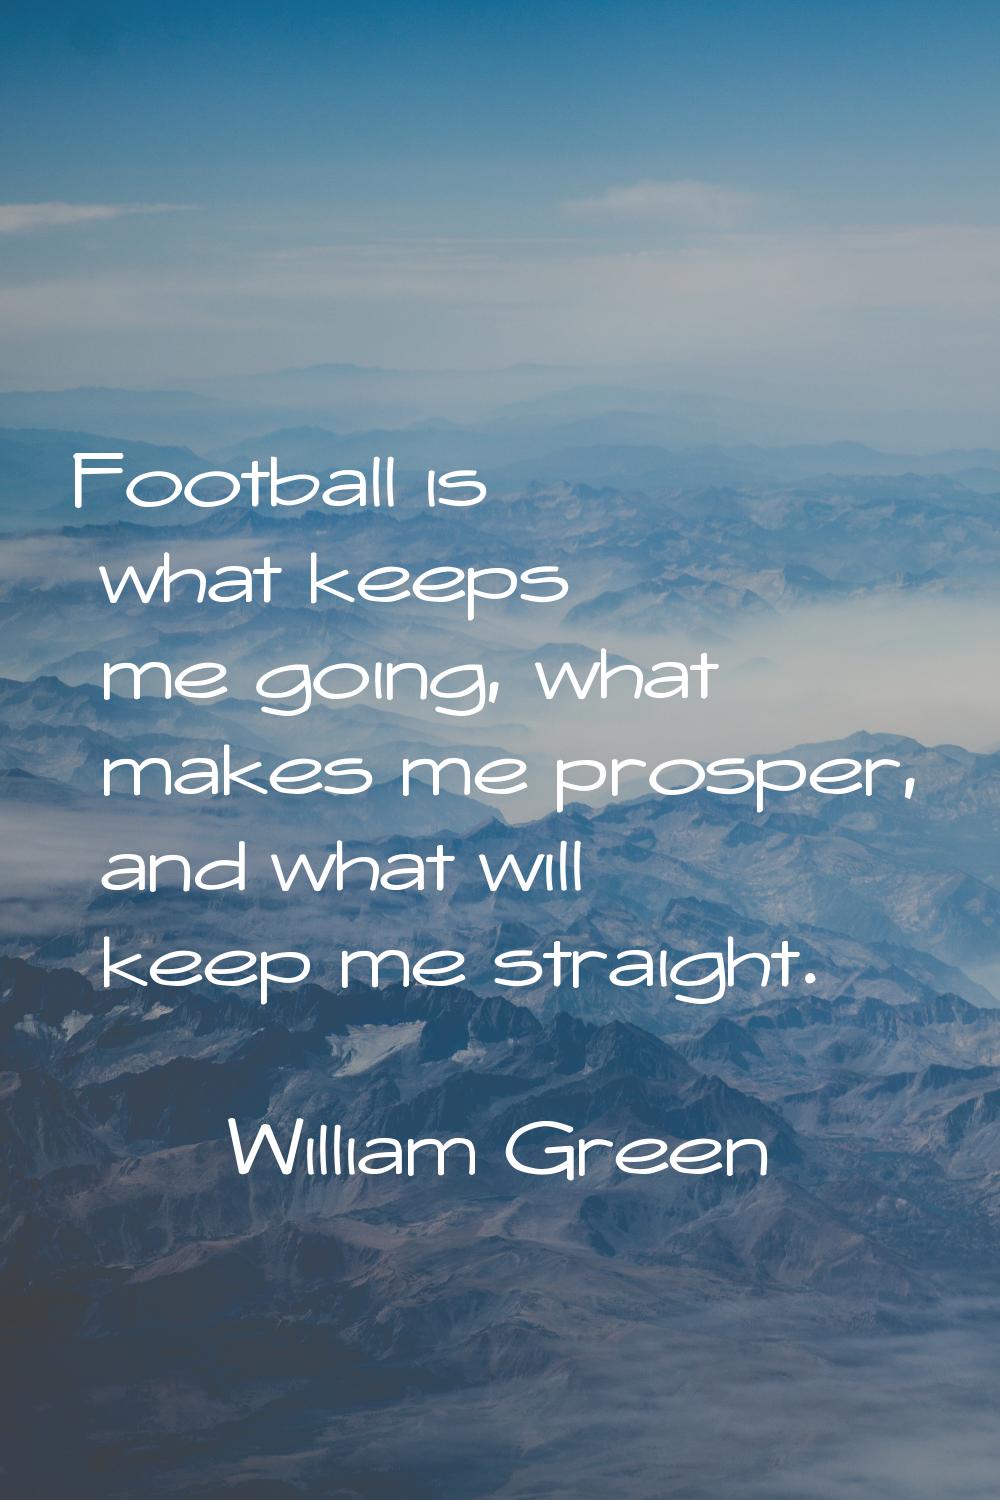 Football is what keeps me going, what makes me prosper, and what will keep me straight.